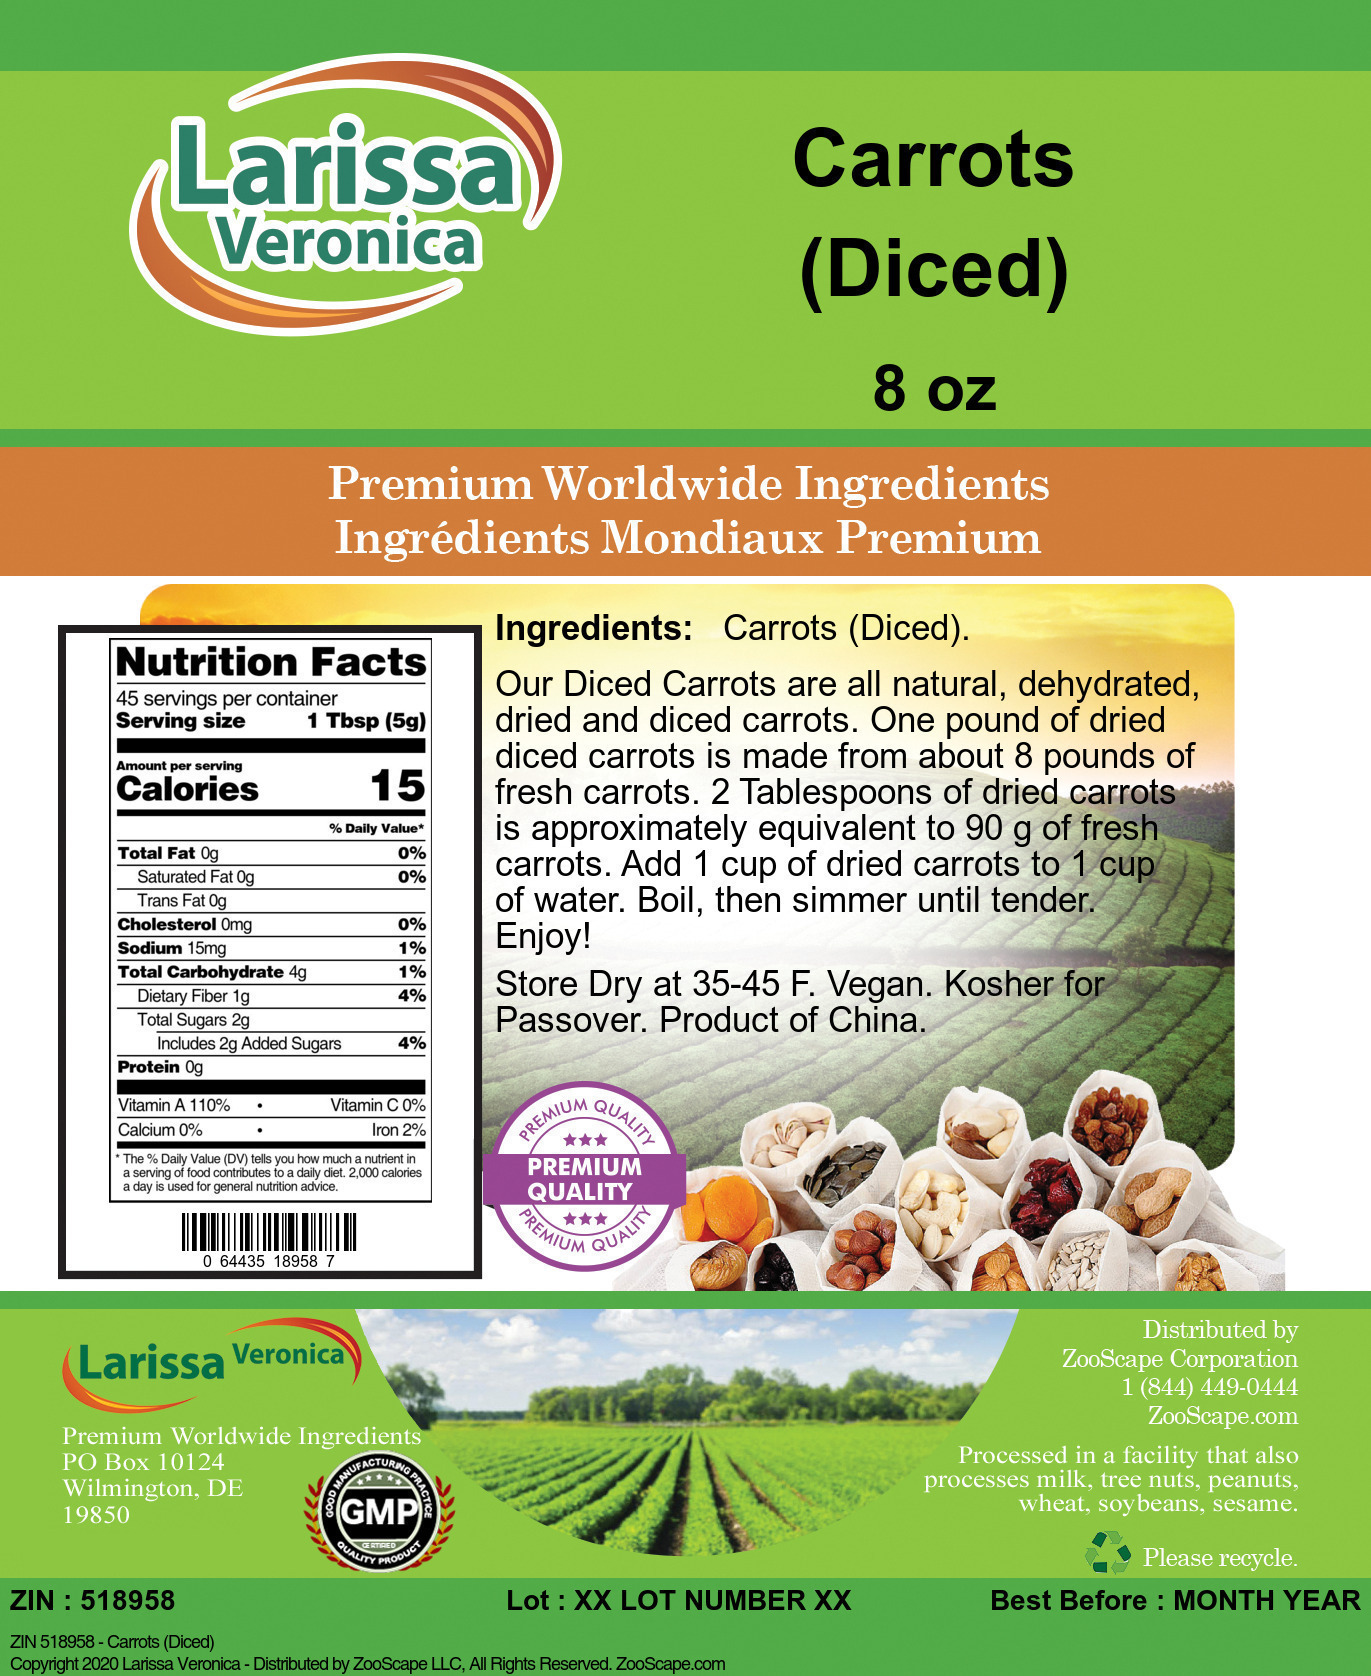 Carrots (Diced) - Label